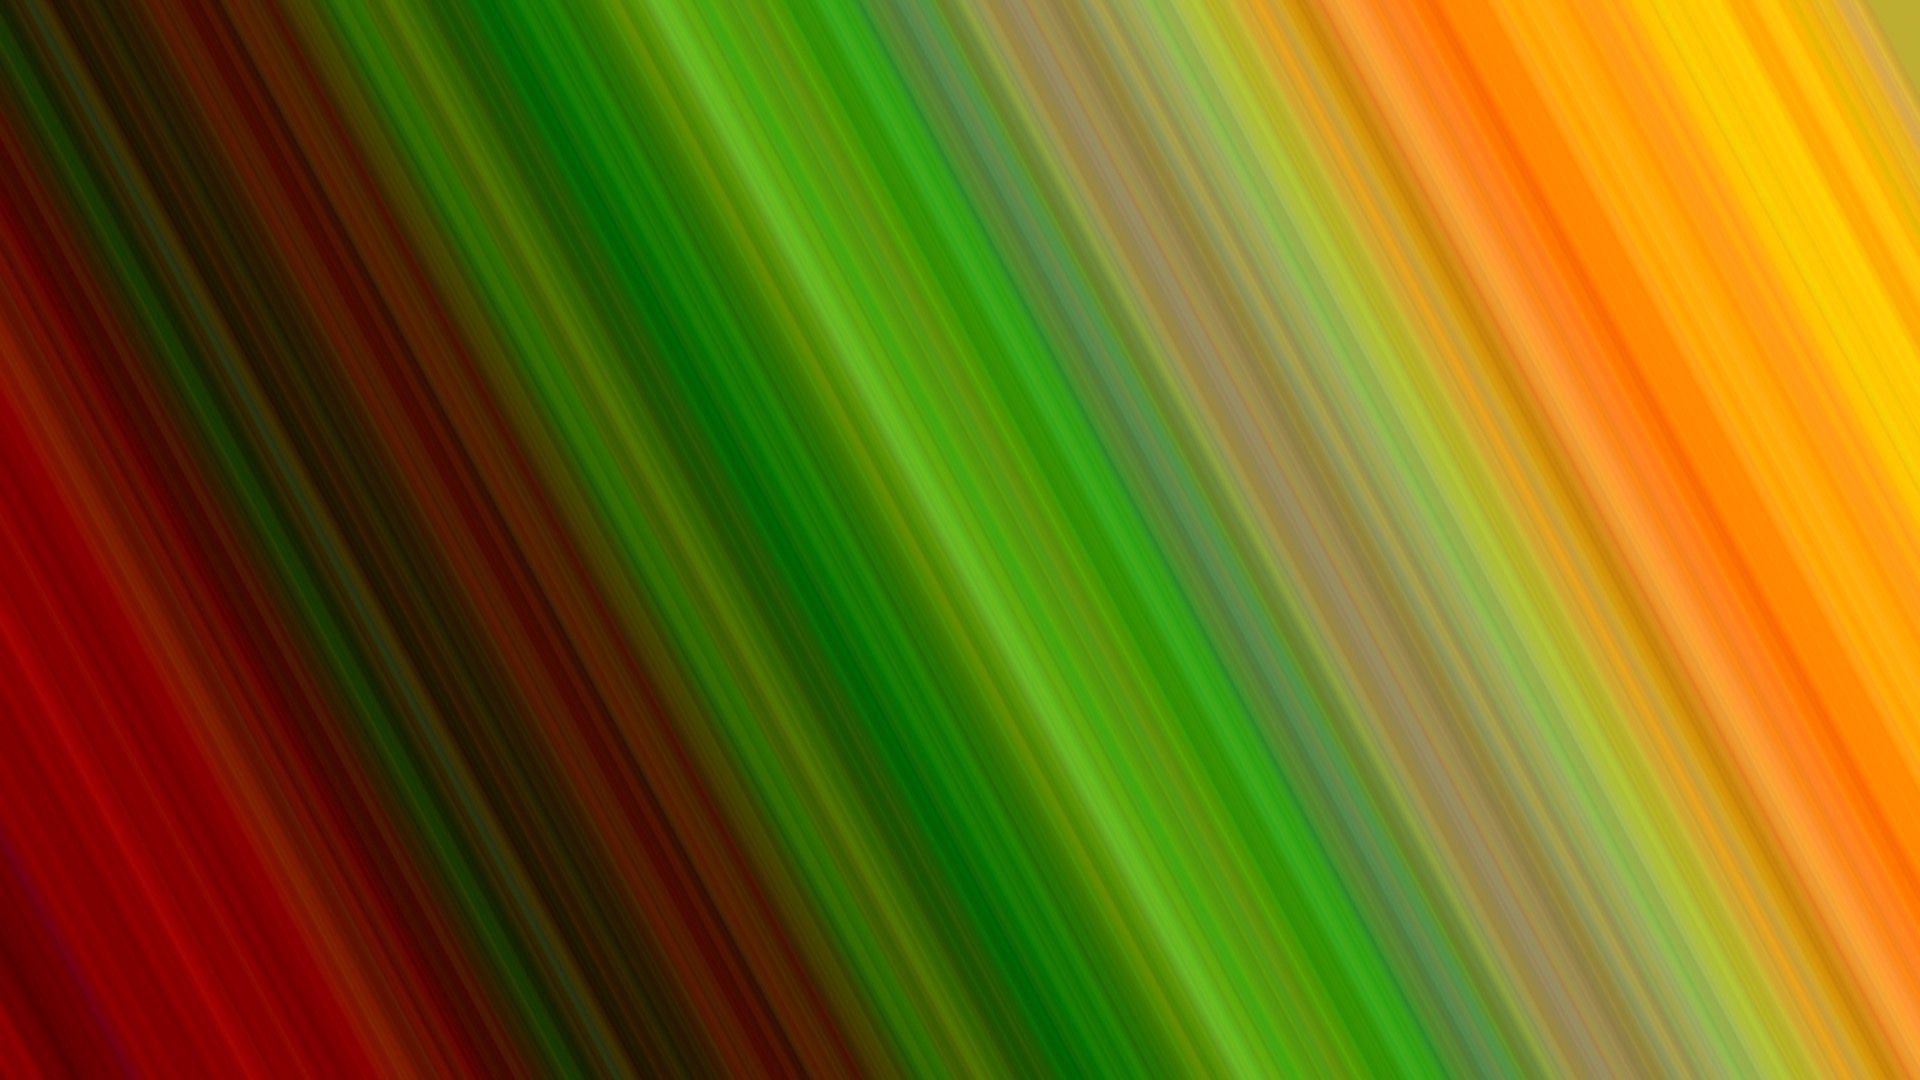 colourful, obliquely, abstract, rainbow, lines, colorful, iridescent lock screen backgrounds